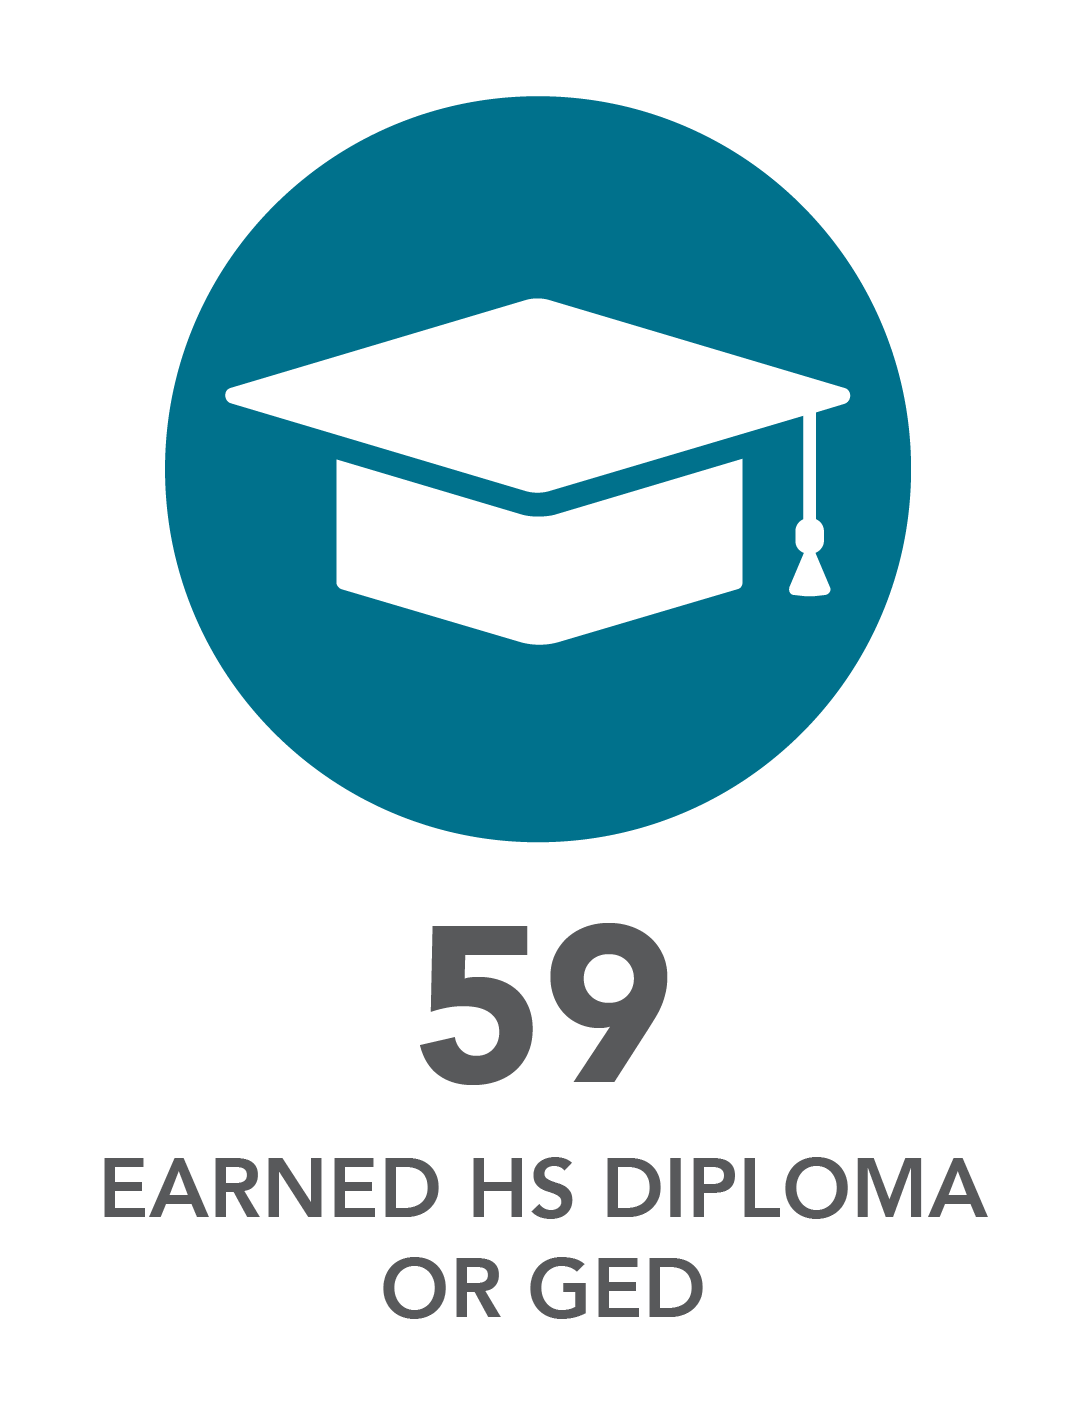 59 earned diploma or GED.